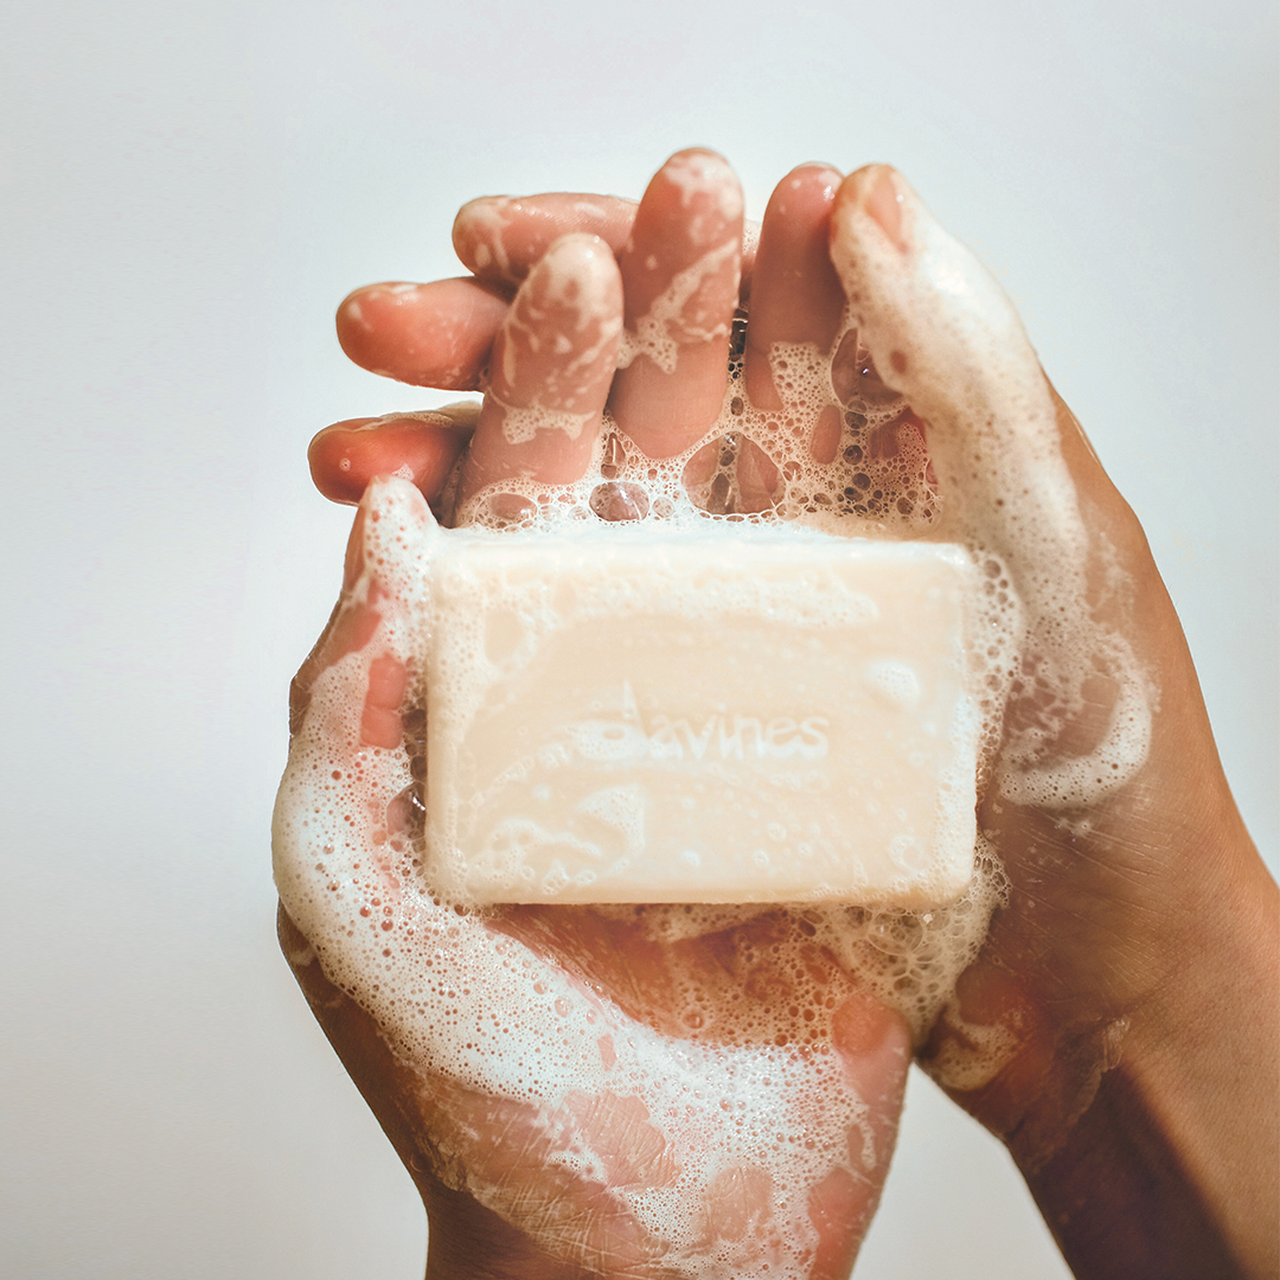 Five of the shampoo bars — That's Not Age